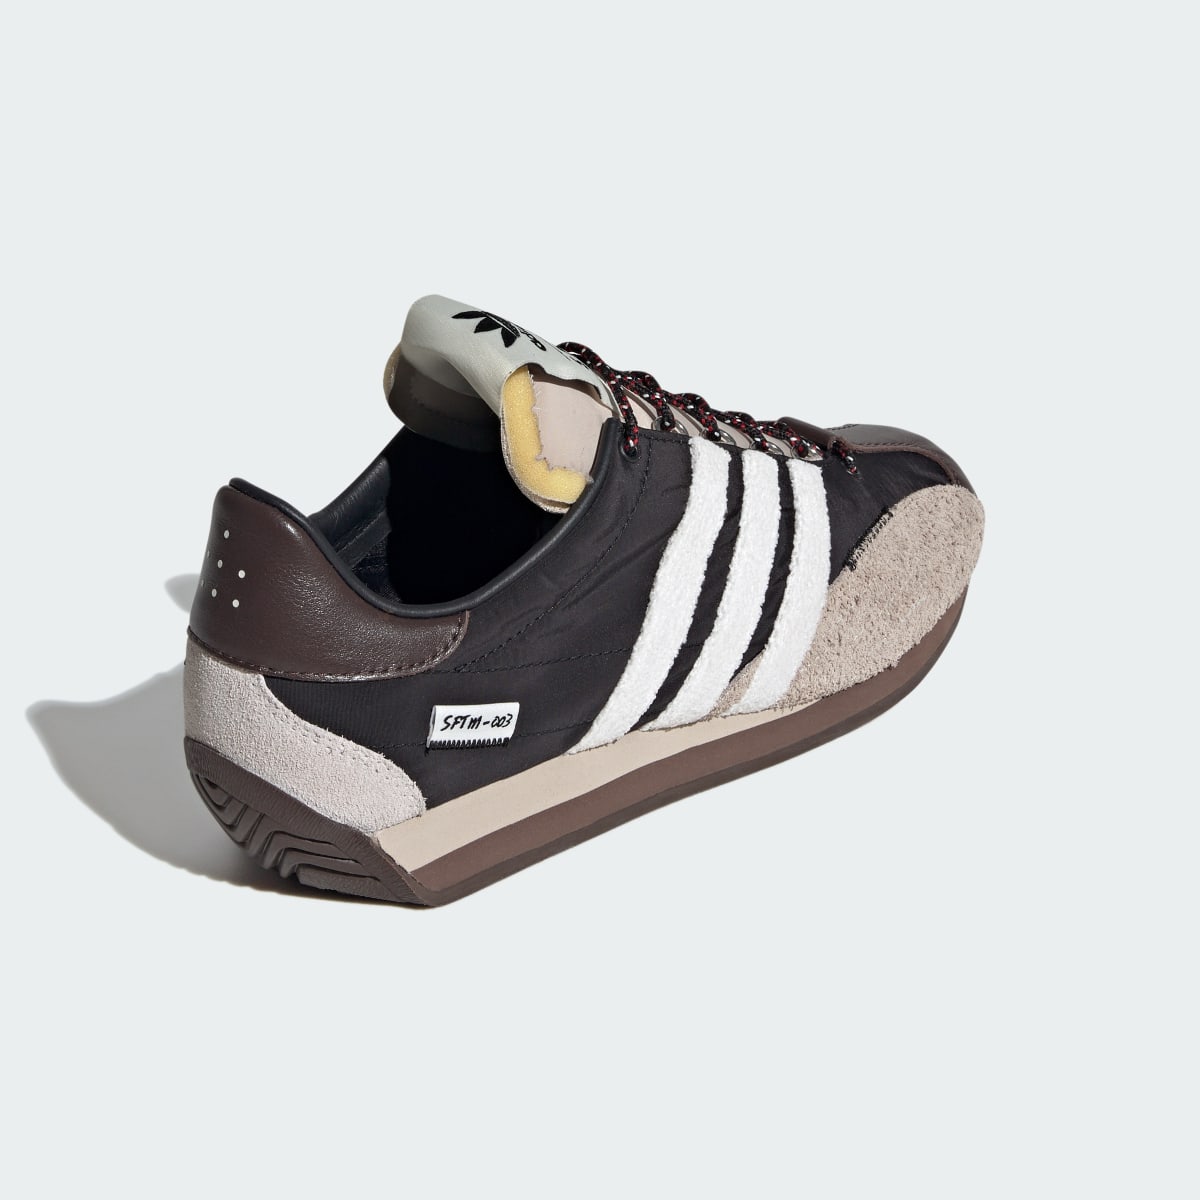 Adidas Country OG Low Trainers. 7